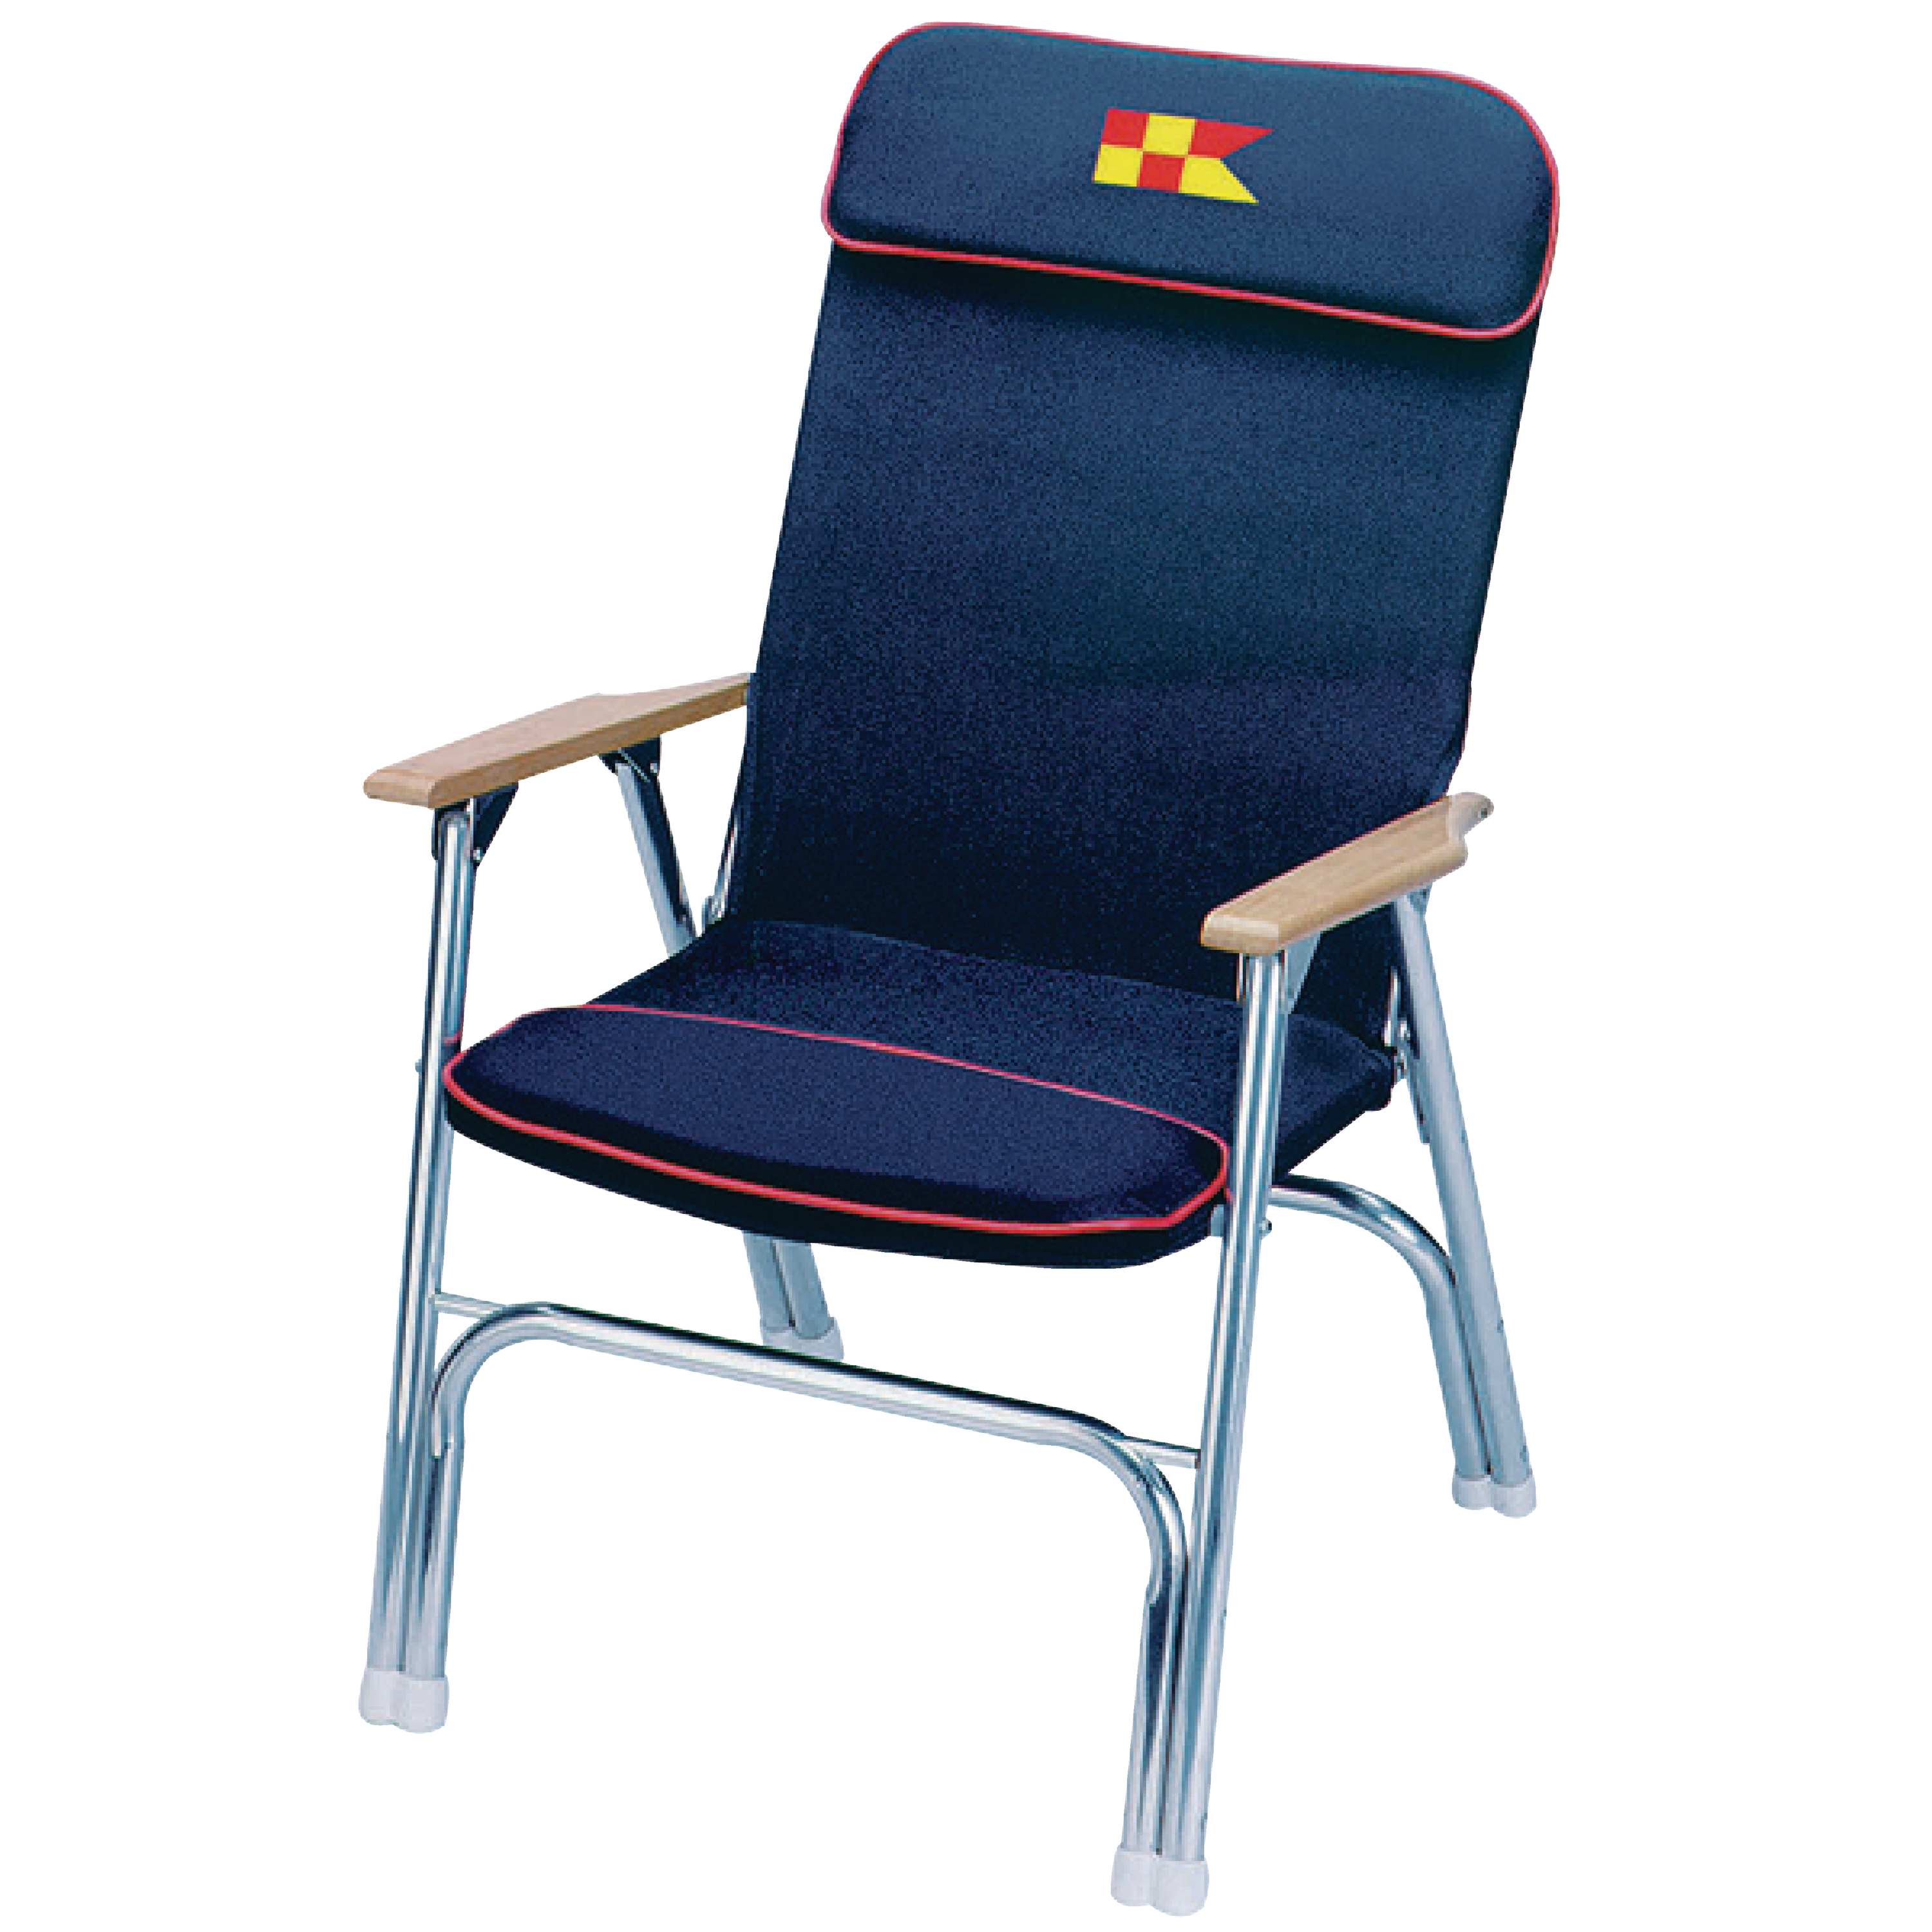 Garelick Eez-In 3-3502962 Designer Series Padded Deck Chair with Anodized Aluminum Frame - Navy with Red Trim - image 1 of 2